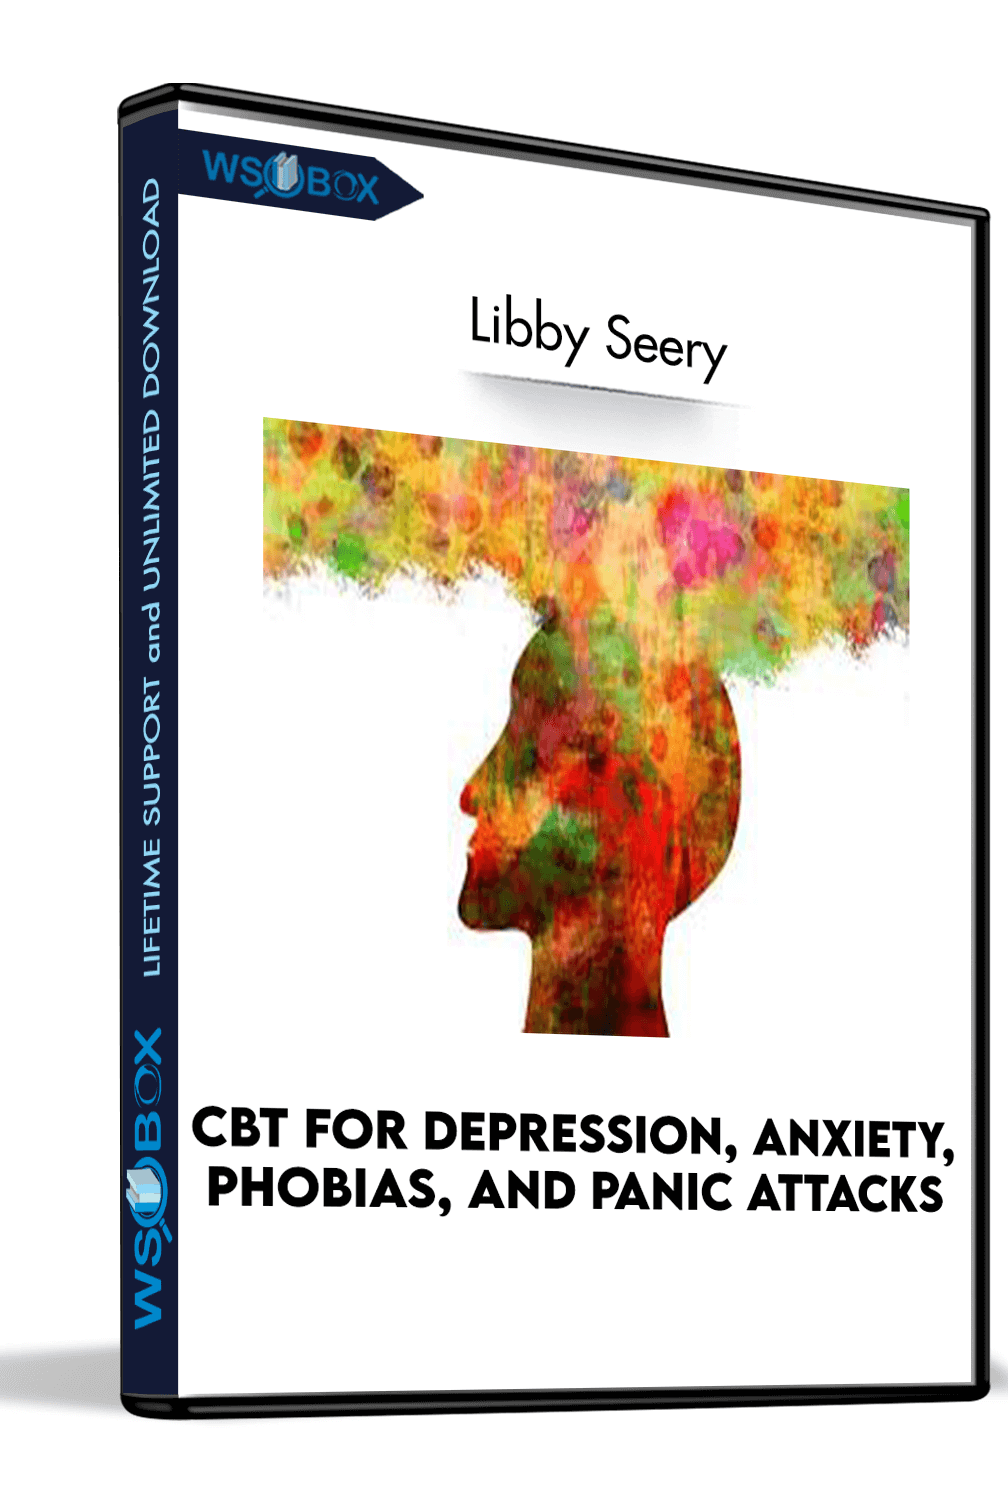 cbt-for-depression-anxiety-phobias-and-panic-attacks-libby-seery